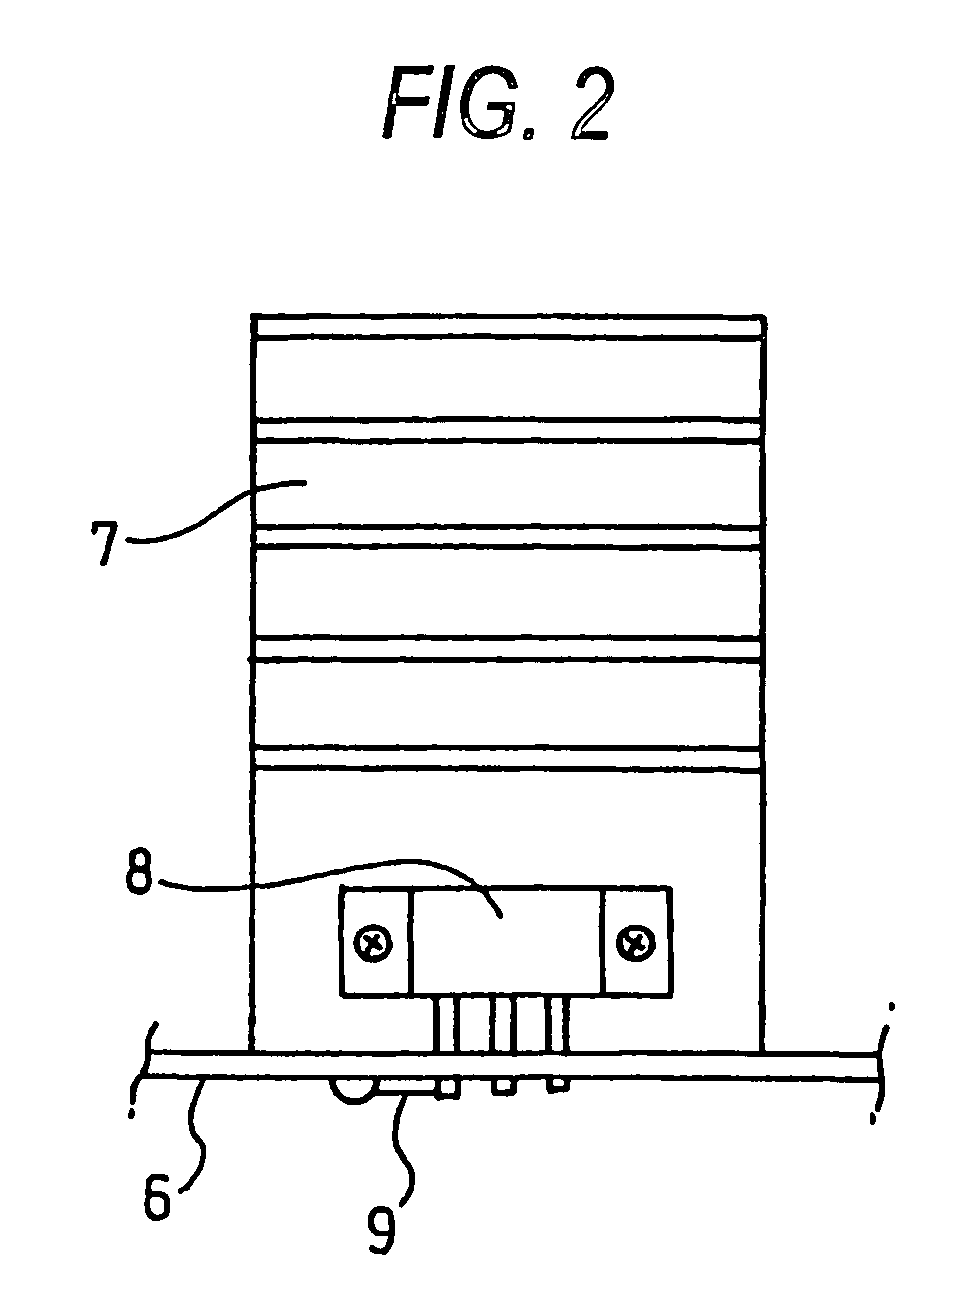 High-frequency dielectric heating device and printed board with thermistor